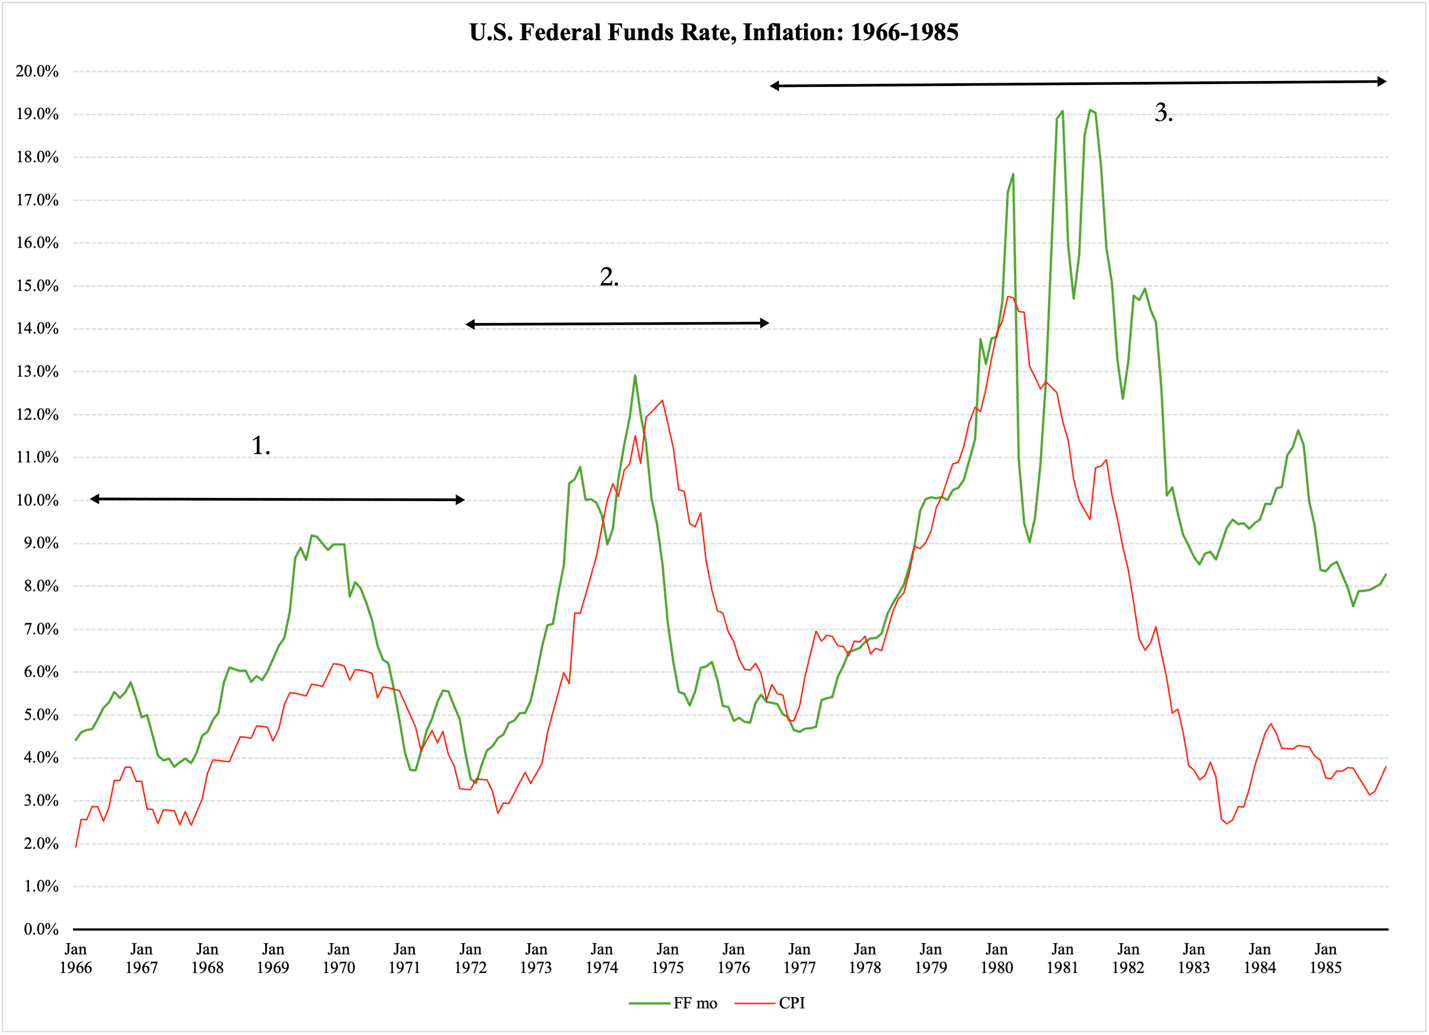 A graph of a graph showing the growth of the us federal funds rate

Description automatically generated